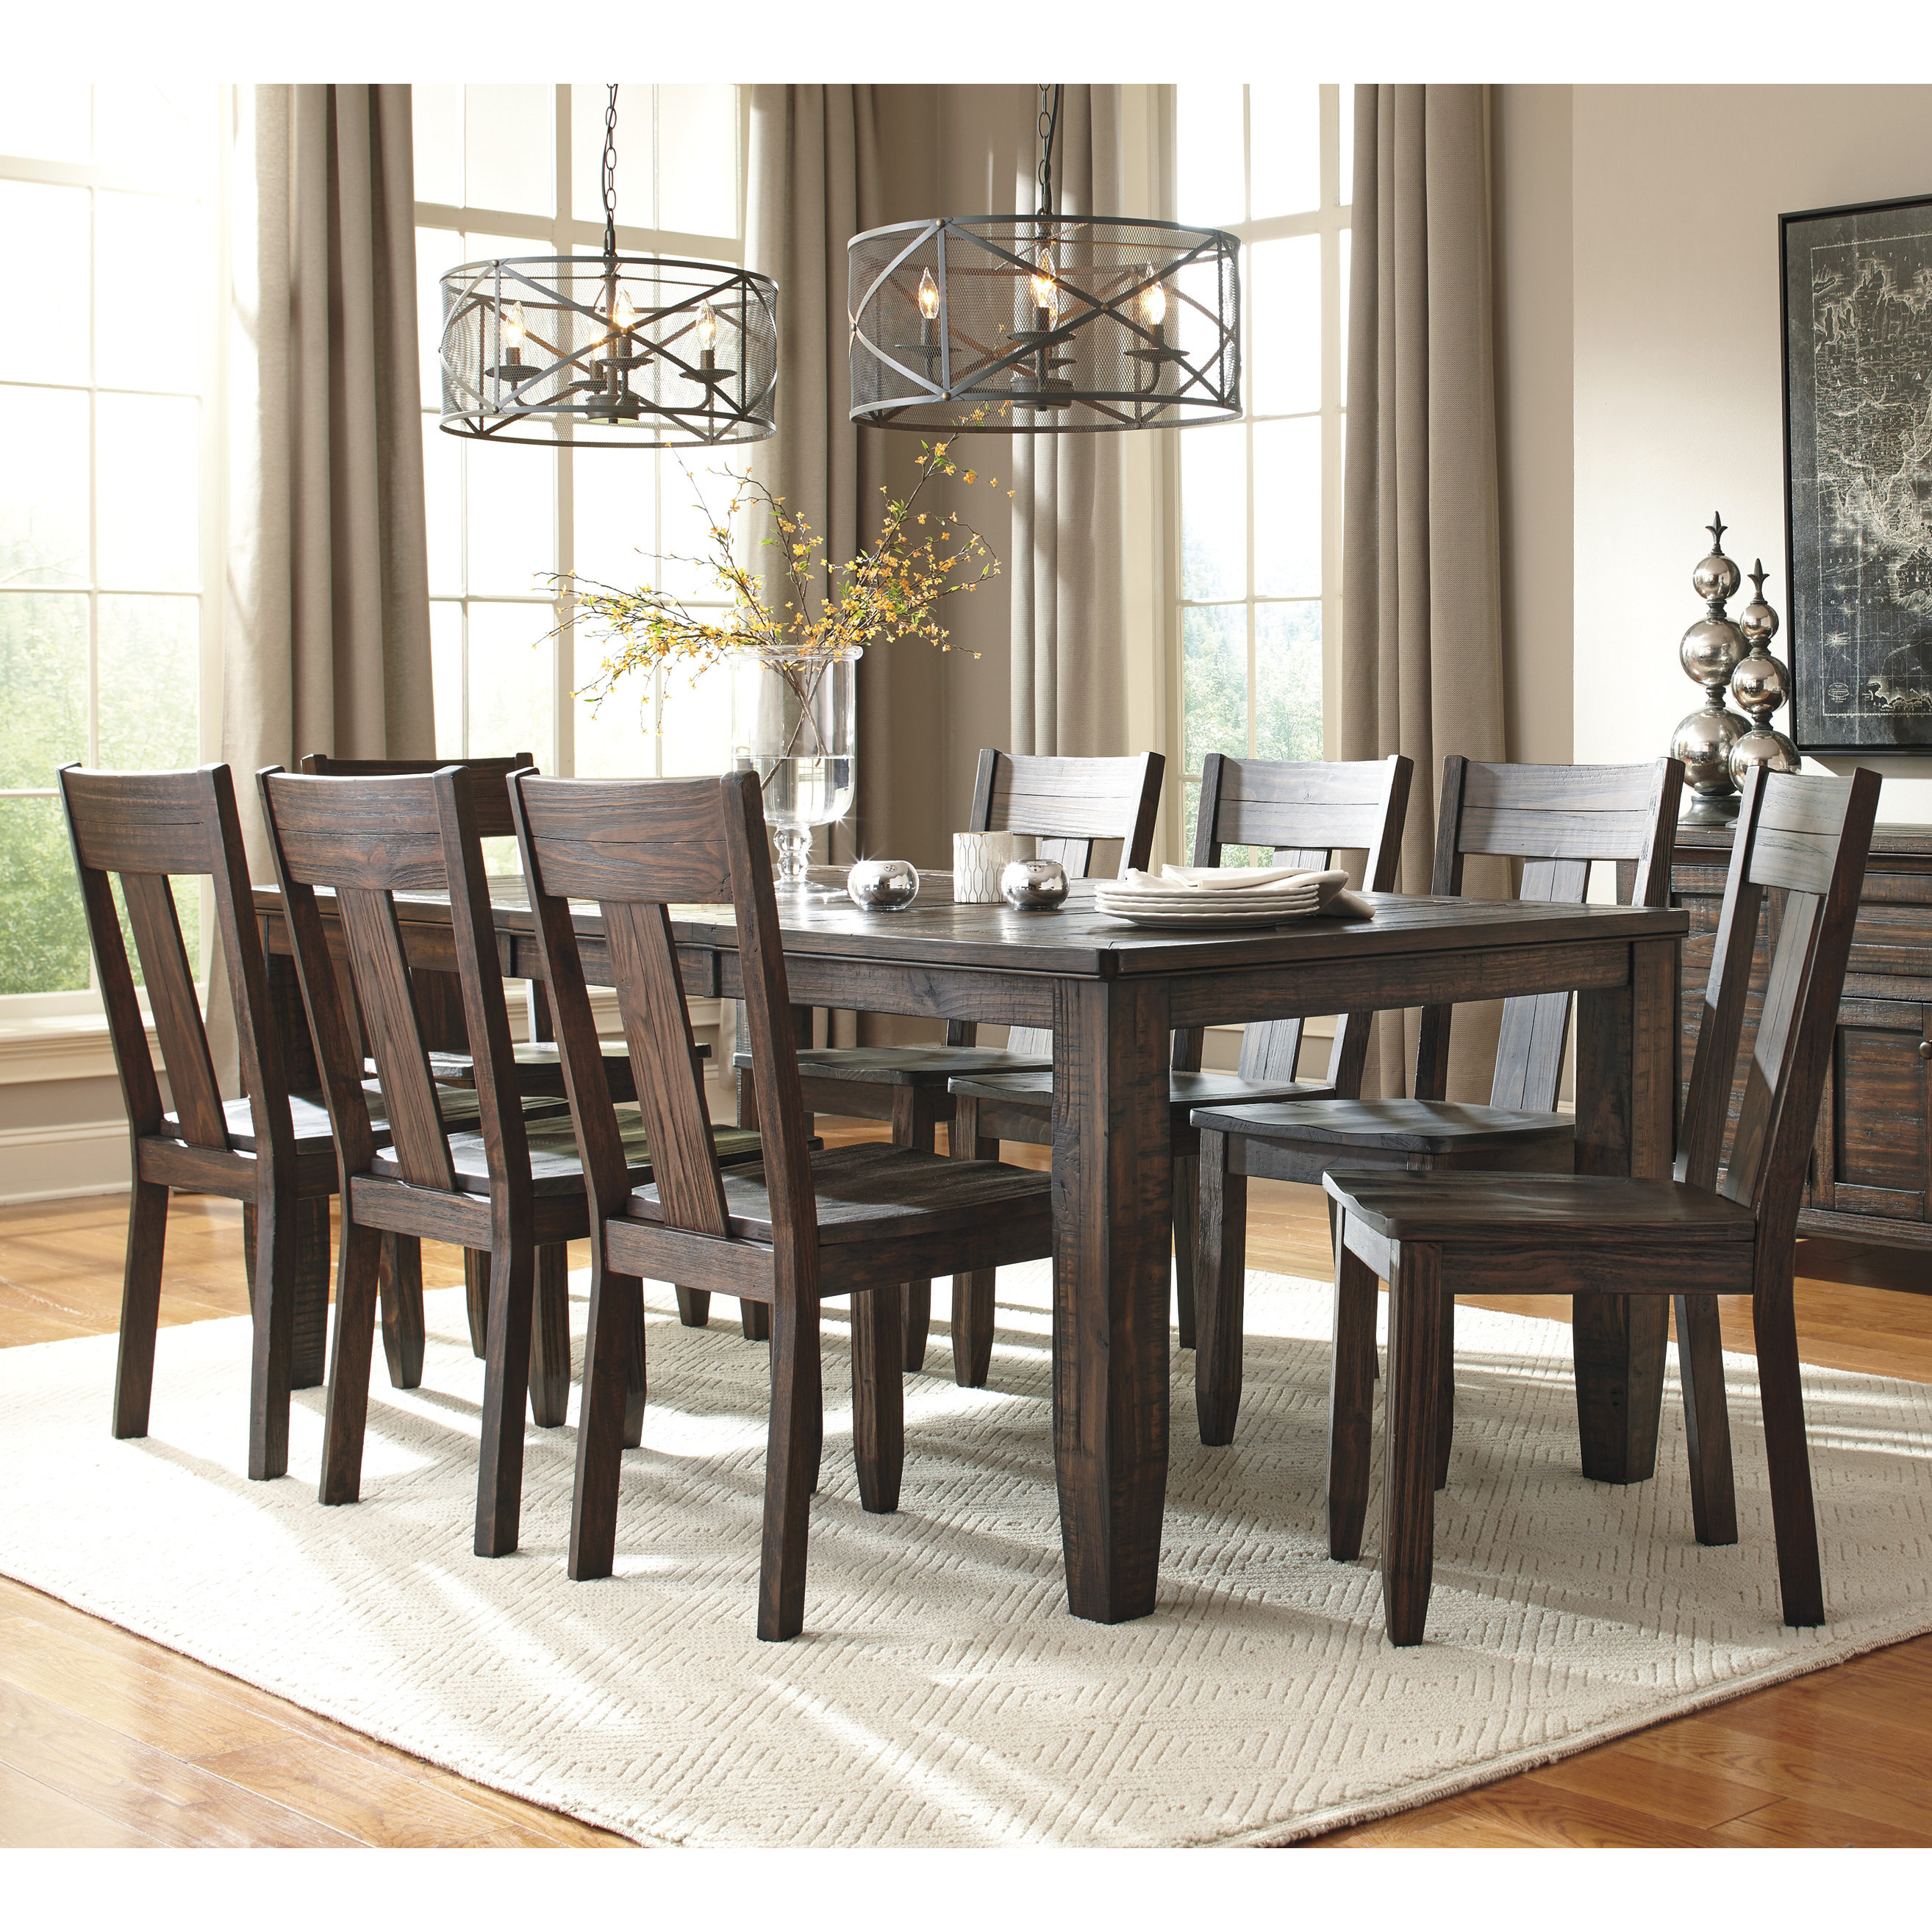 Modern 9 Piece Dining Room Set for Large Space